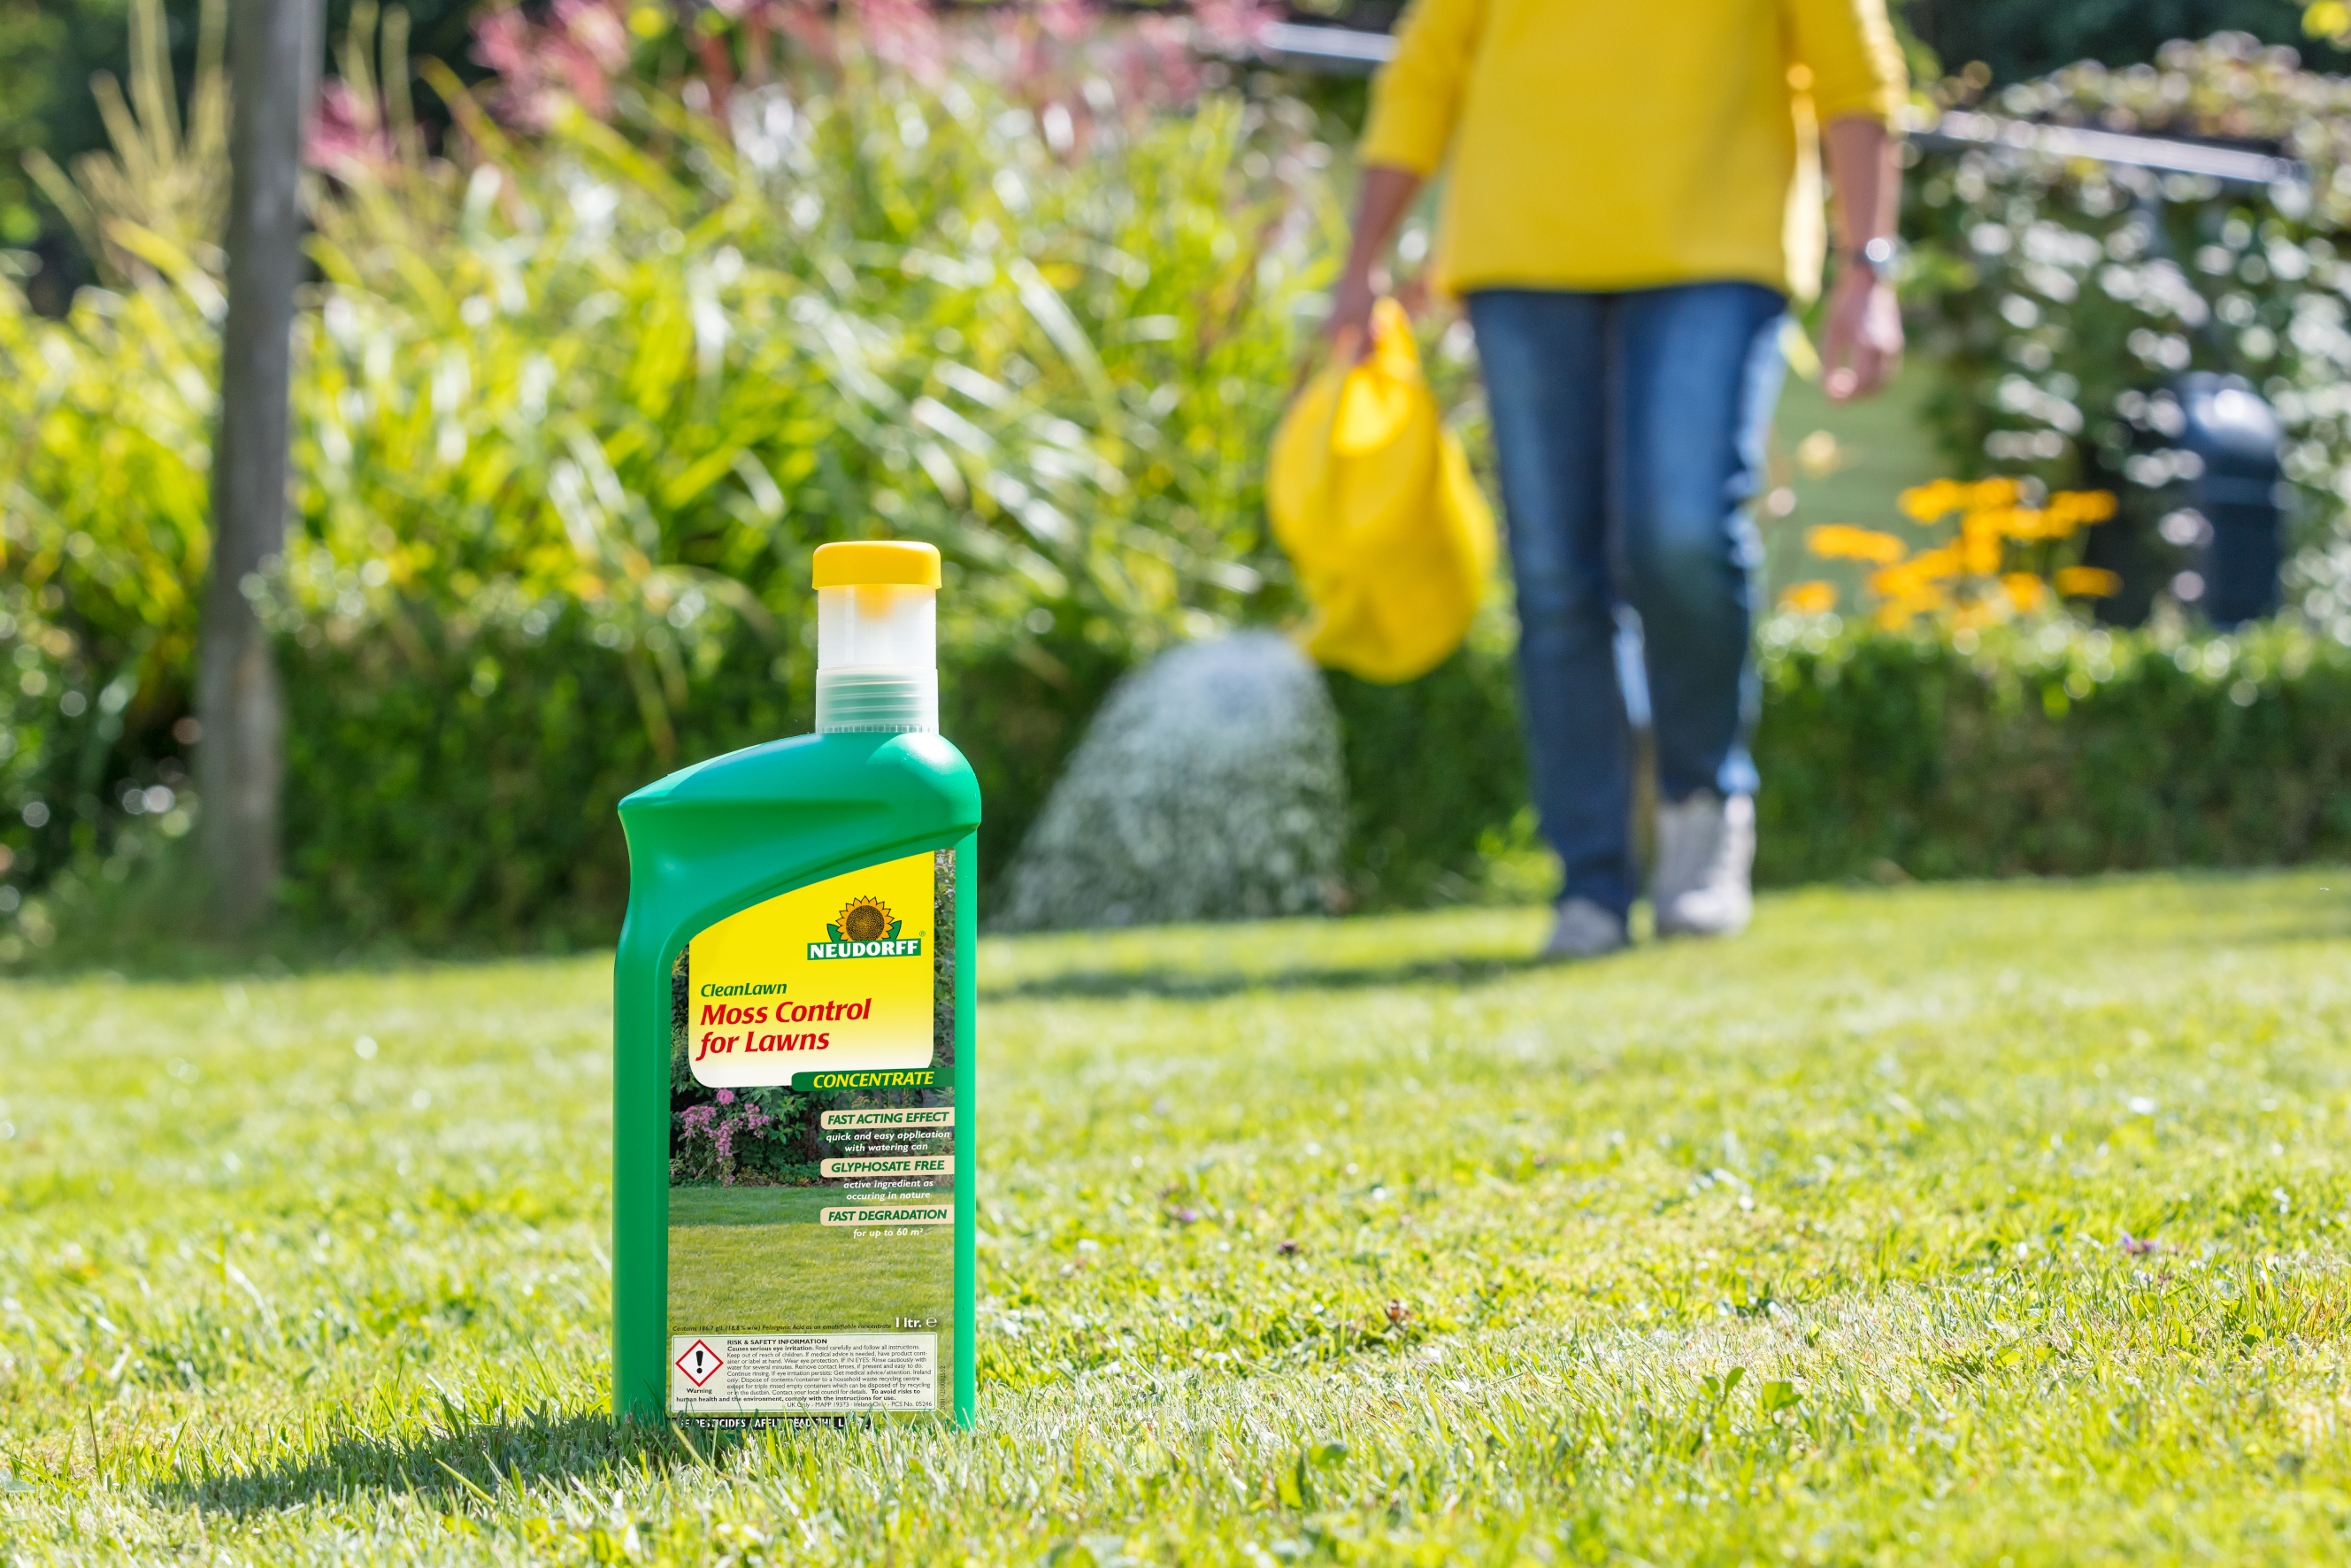 Fight moss in the lawn without harming grass or staining surrounding stone areas.